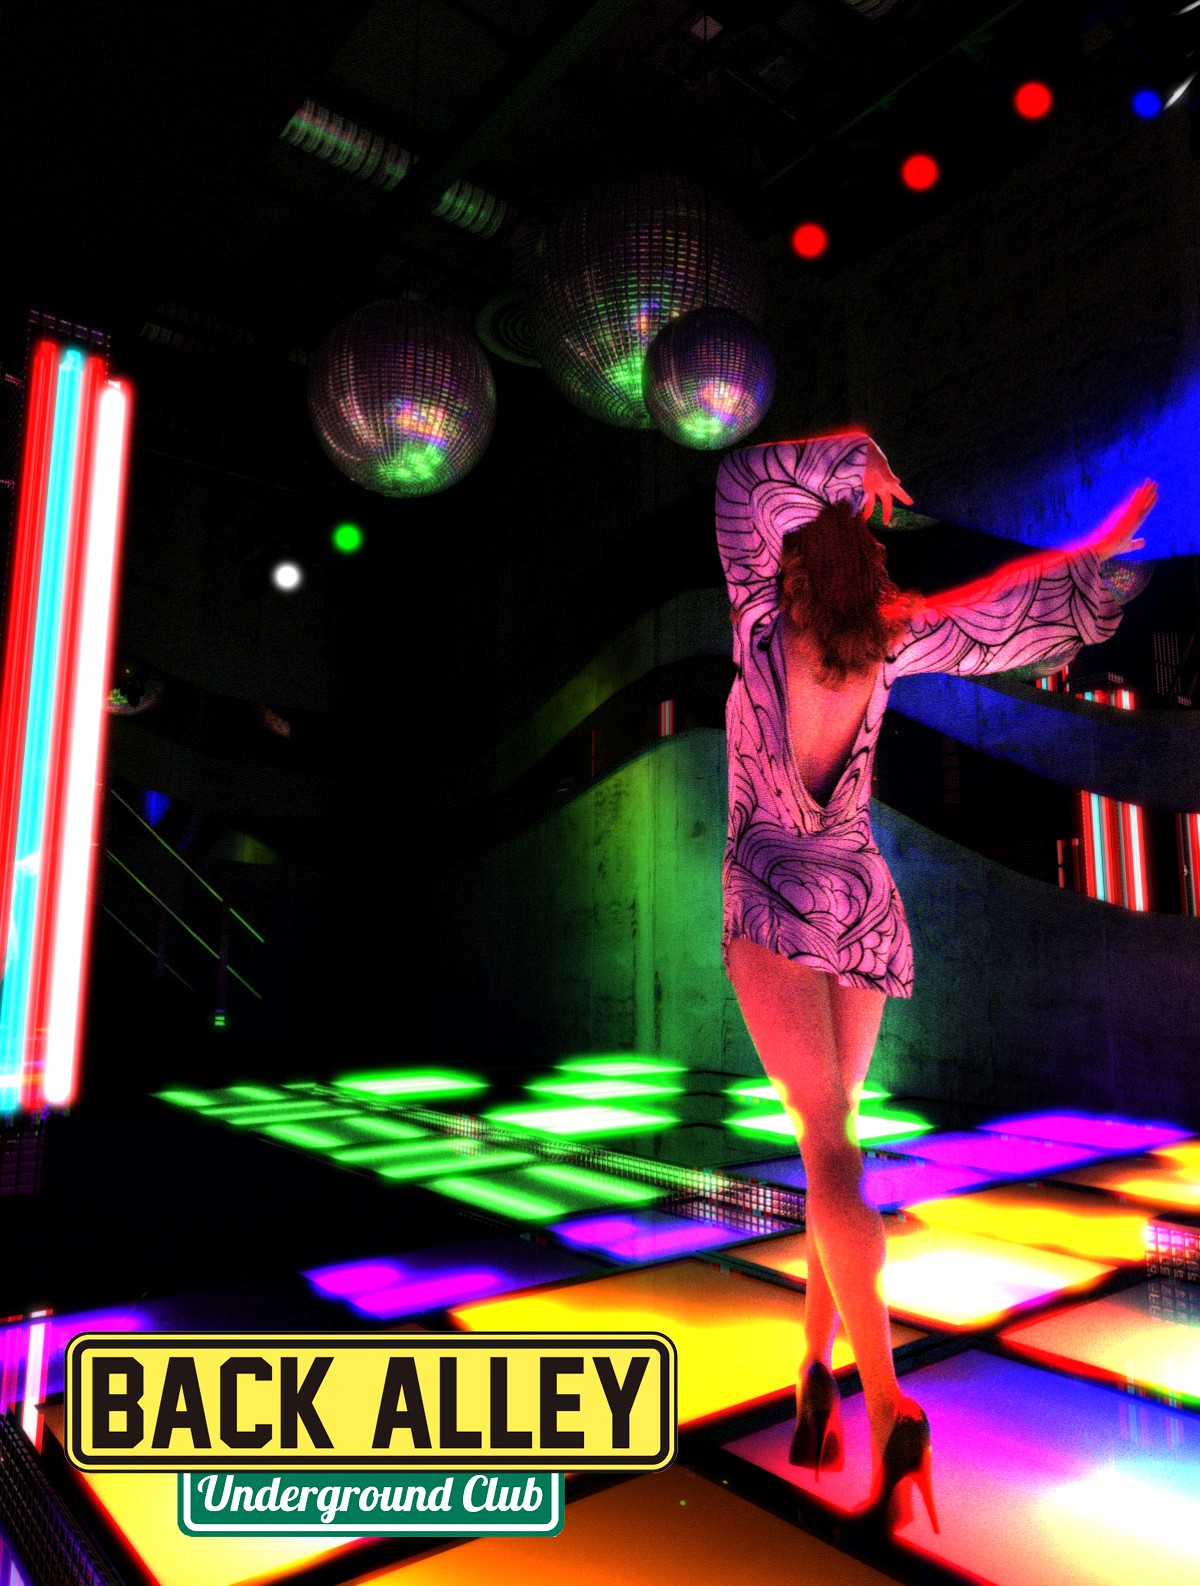 Back Alley Underground Club for DS Iray